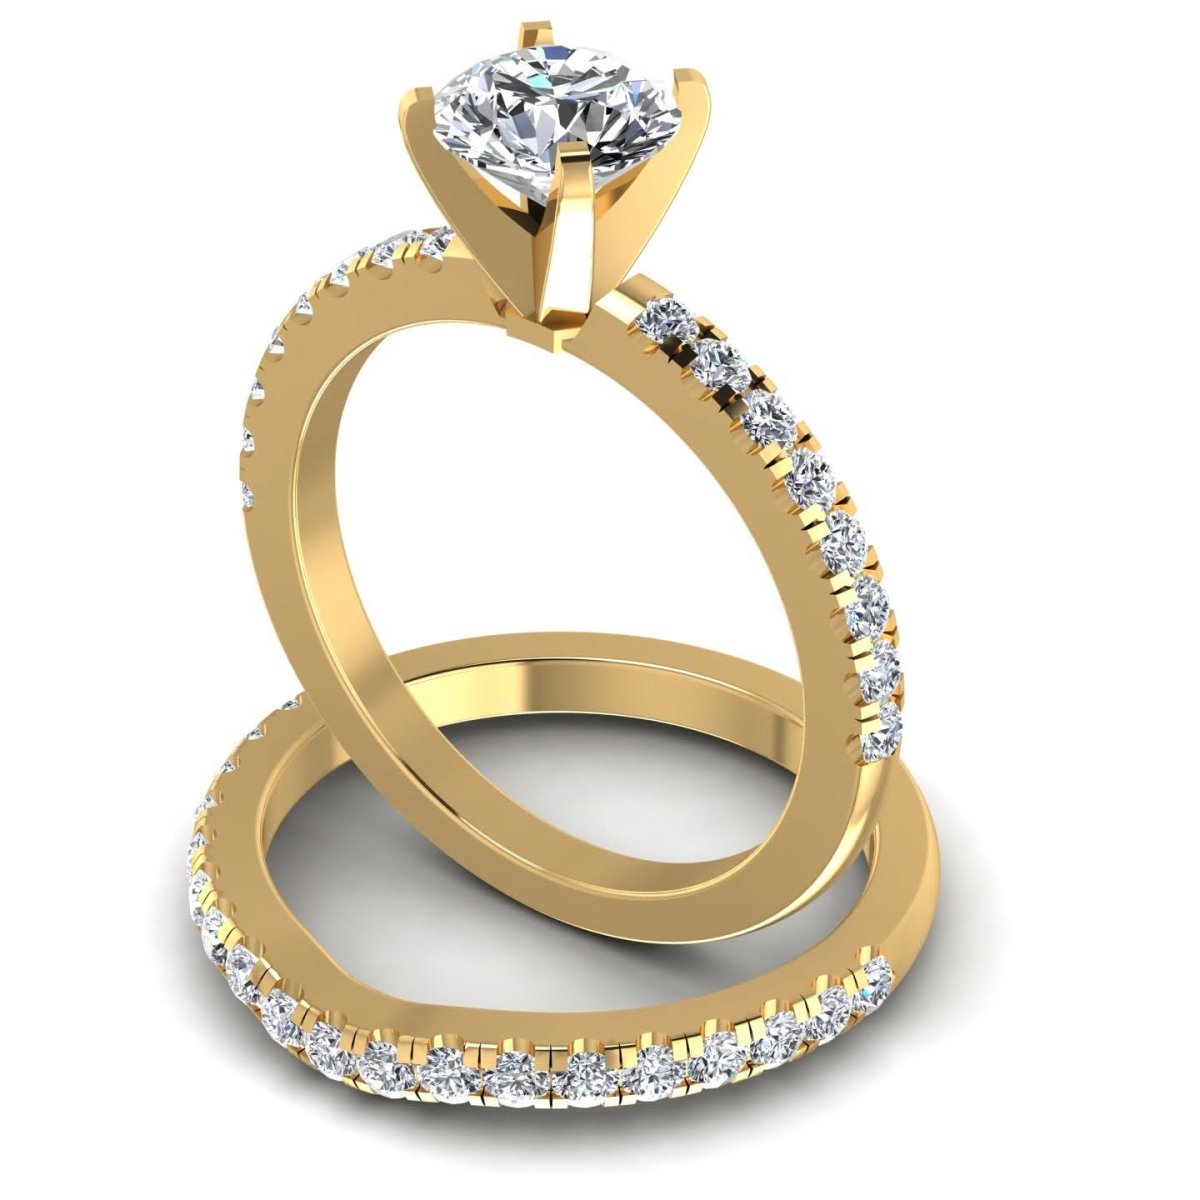 Exquisite 1.20CT Round Cut Diamond Bridal Set in 14KT Yellow Gold - Primestyle.com